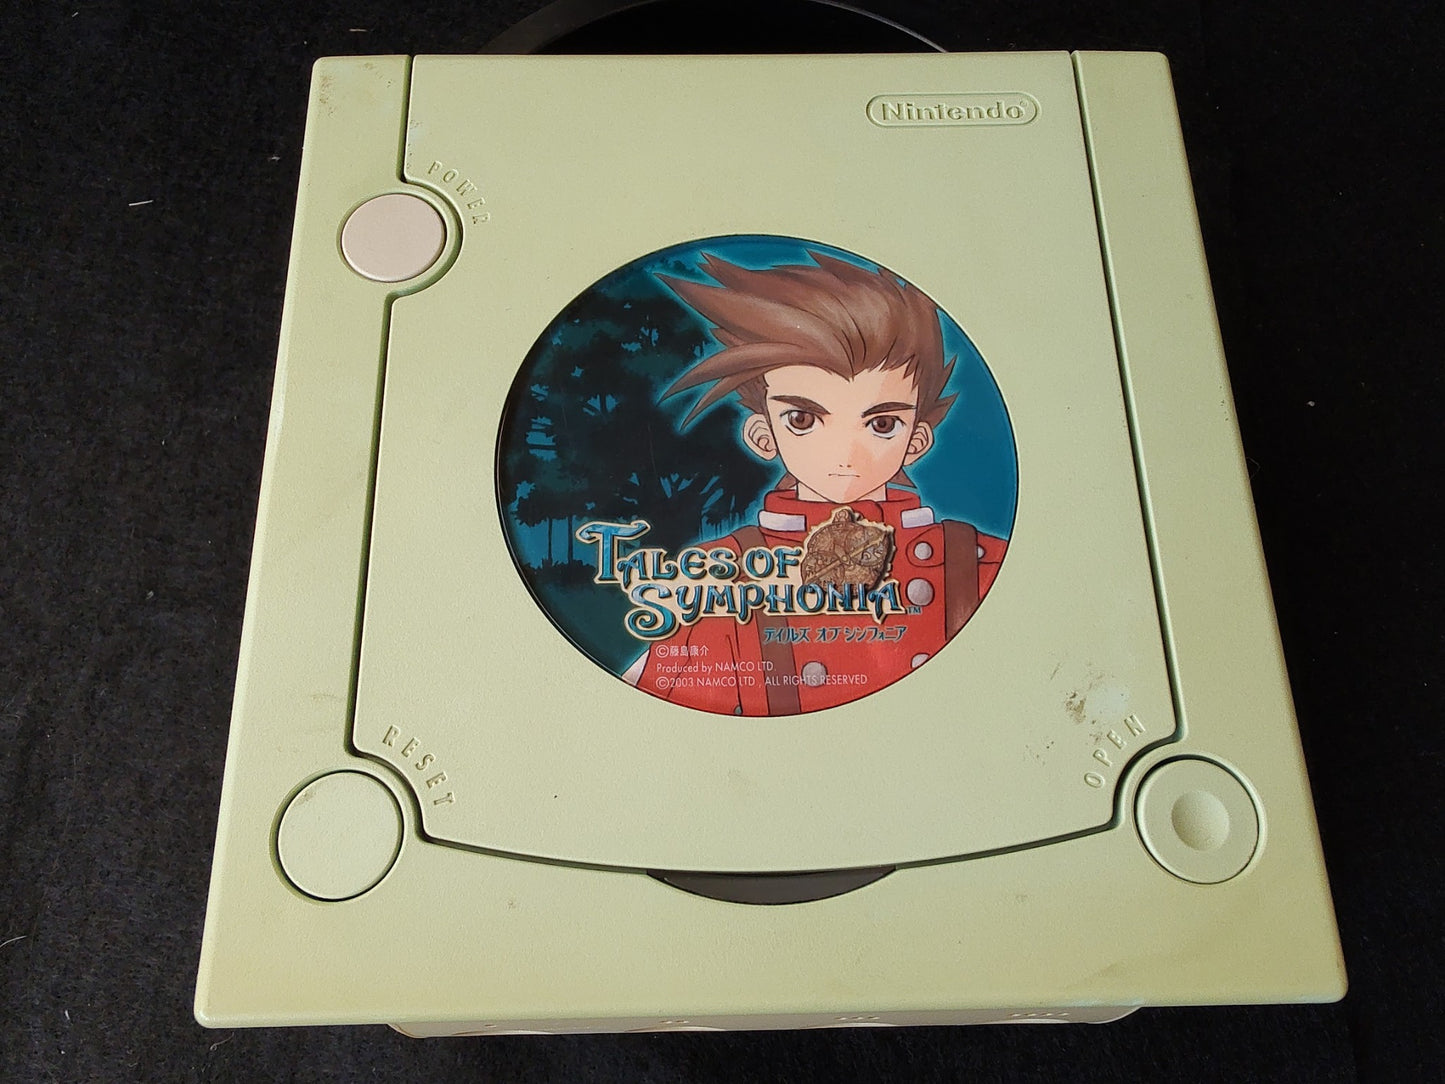 Defective Nintendo Gamecube Symphonic Green Console Tales of symphonia limited